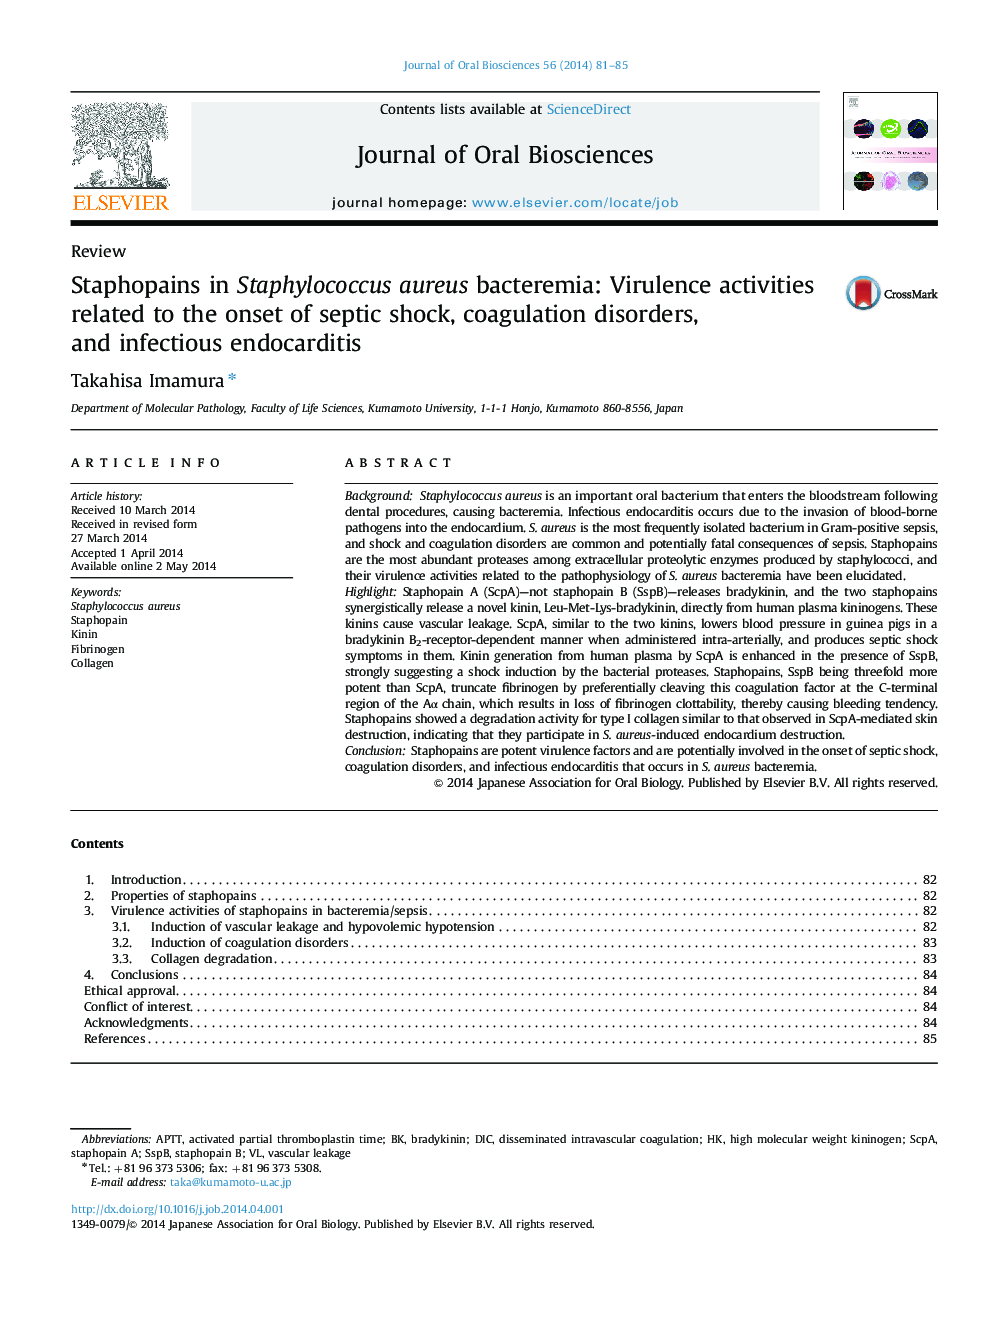 Staphopains in Staphylococcus aureus bacteremia: Virulence activities related to the onset of septic shock, coagulation disorders, and infectious endocarditis